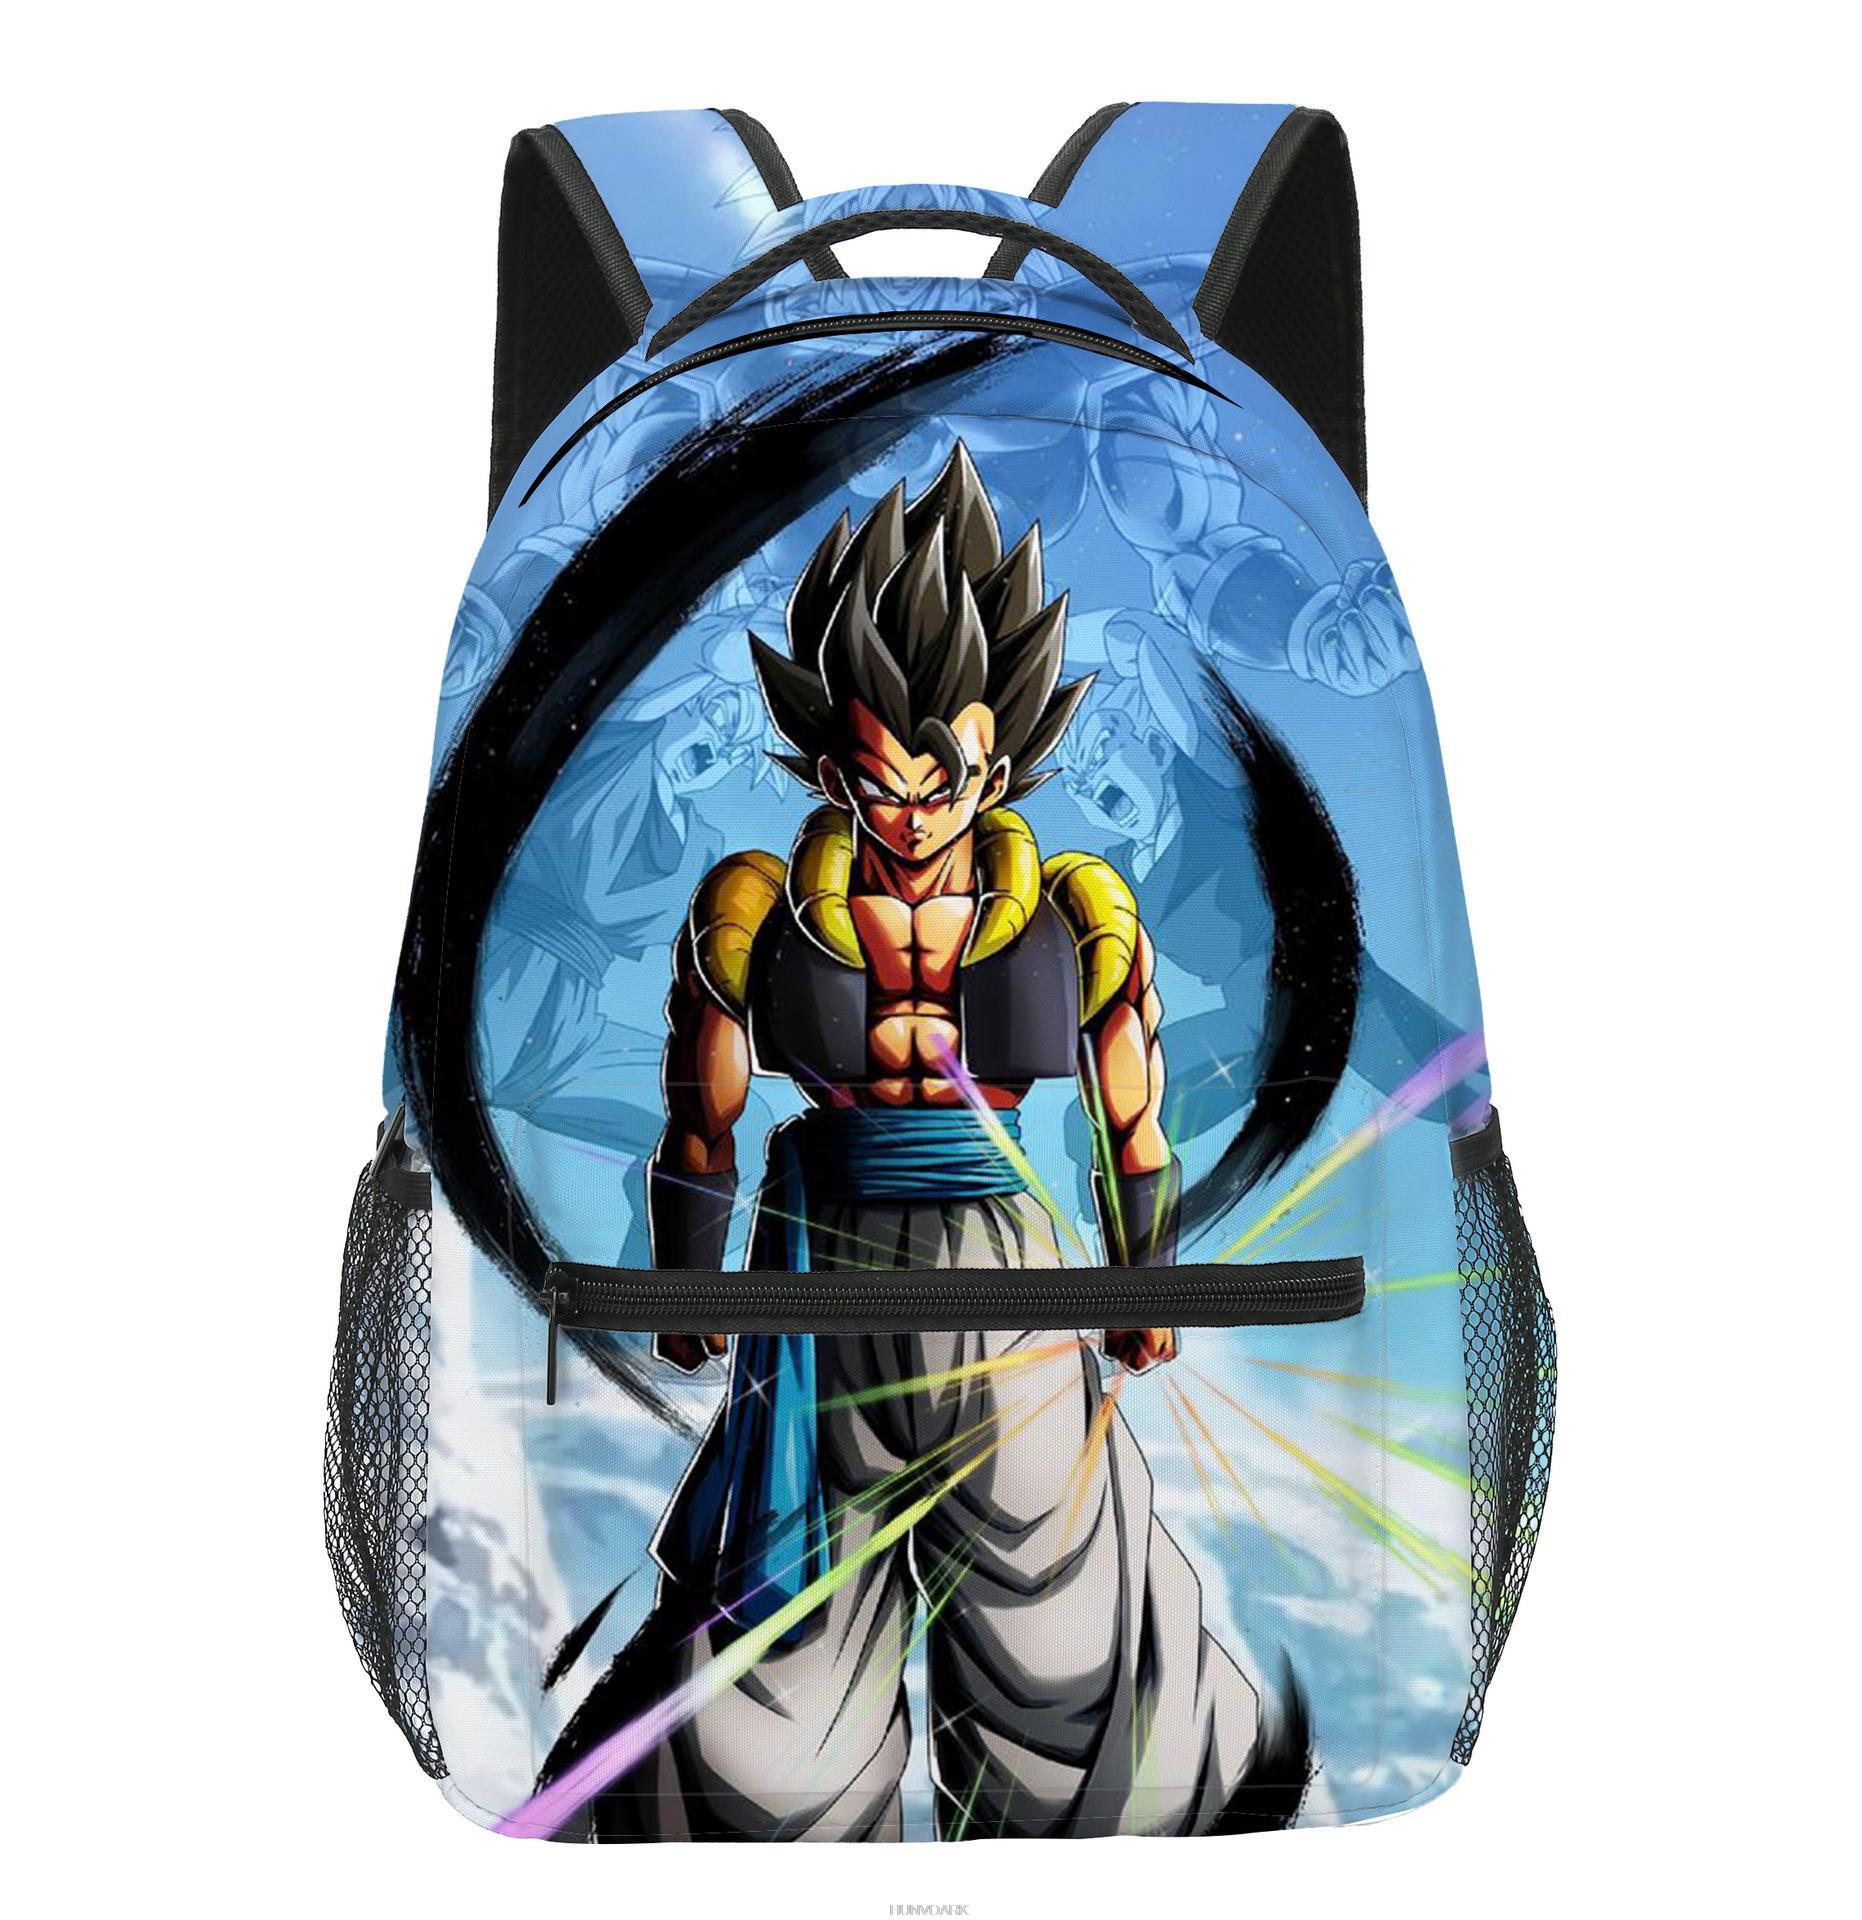 3D Anime Goku Backpack Fabric OxFord Child Travel School Accessories ST25